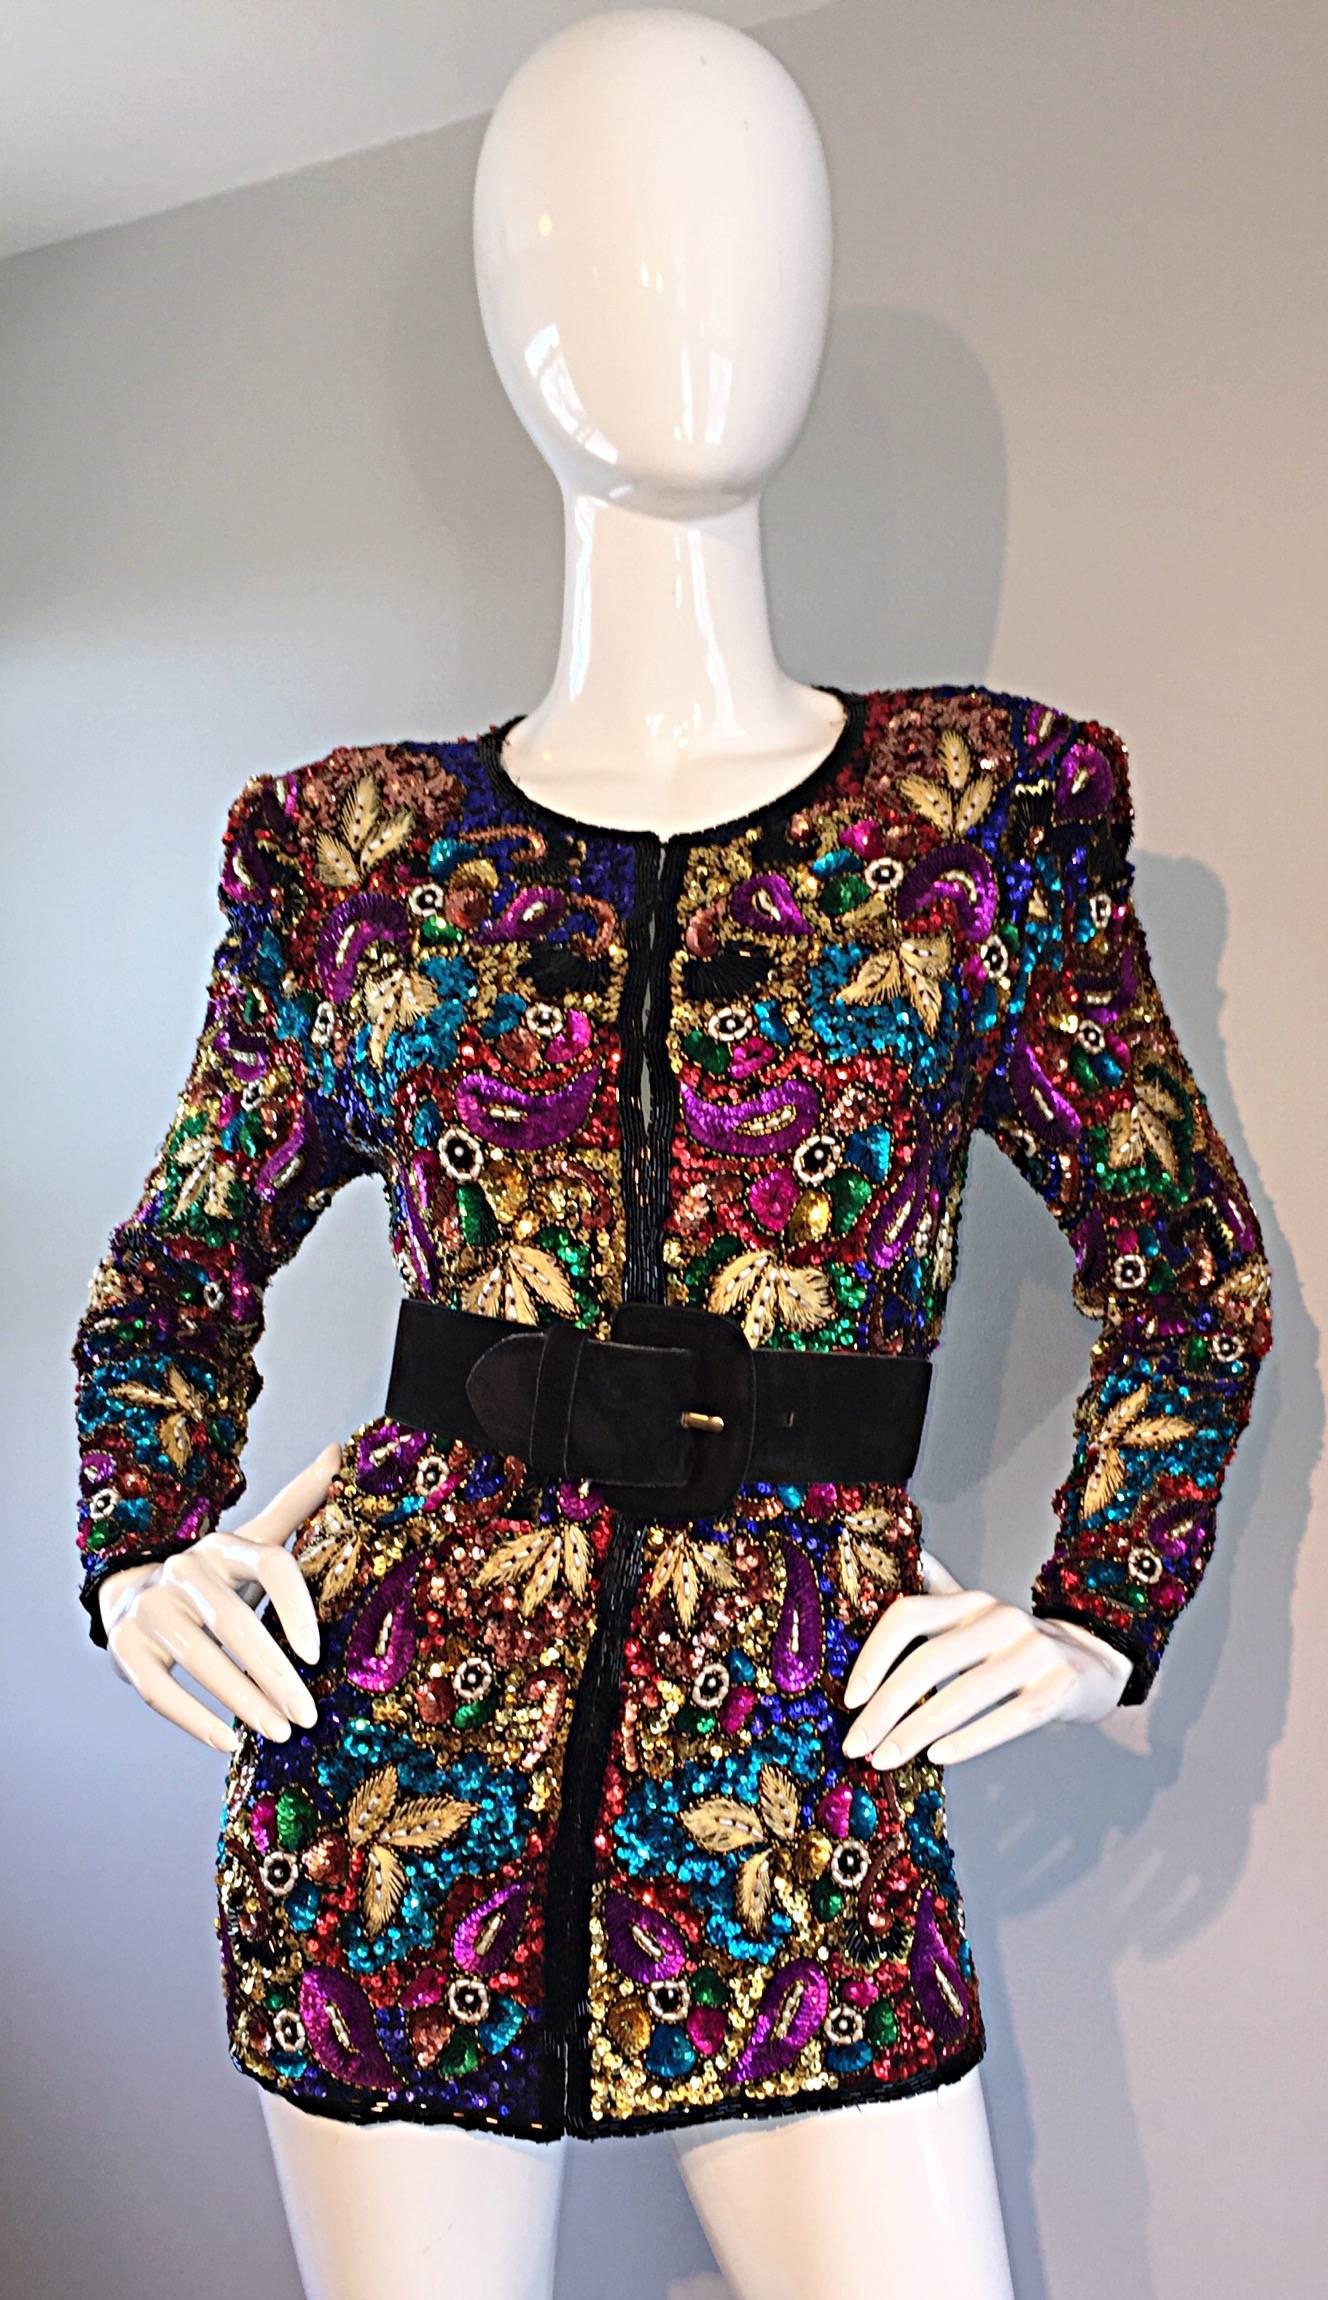 Spectacular Vintage Sequined and Beaded Silk Jacket All - Over Sequins In Excellent Condition For Sale In San Diego, CA